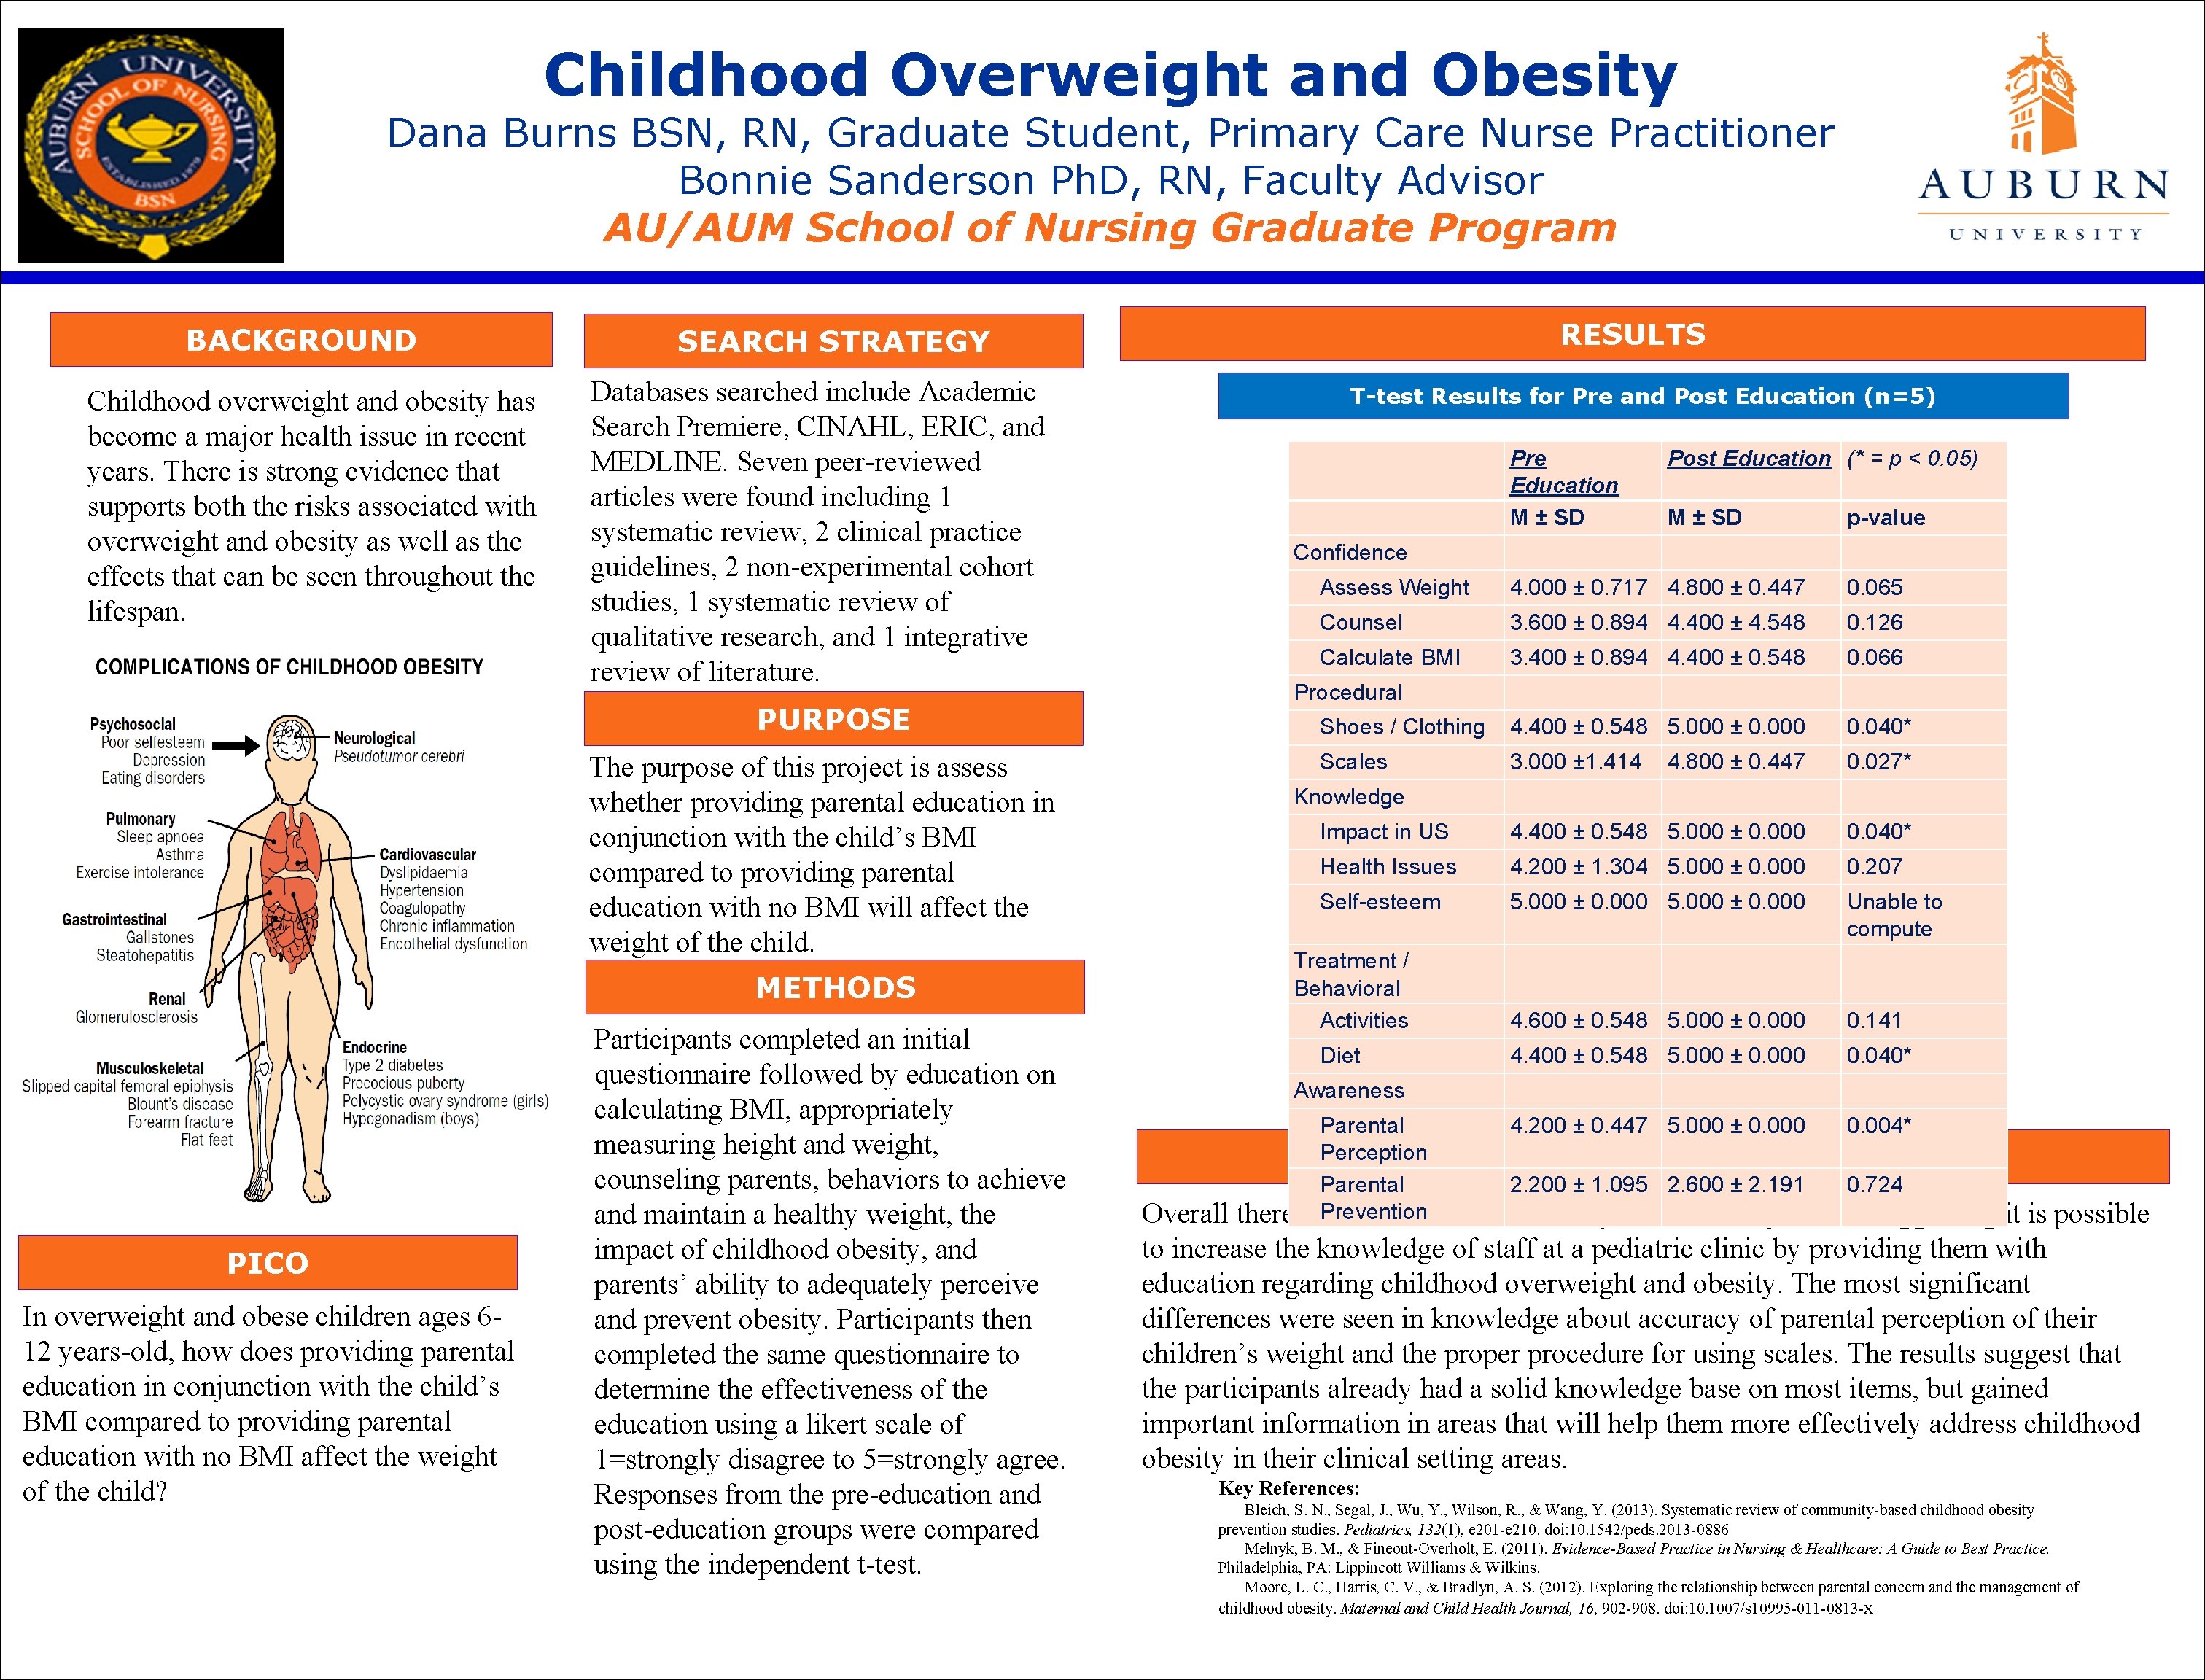 Childhood Overweight and Obesity Dana Burns BSN, RN, Graduate Student, Primary Care Nurse Practitioner